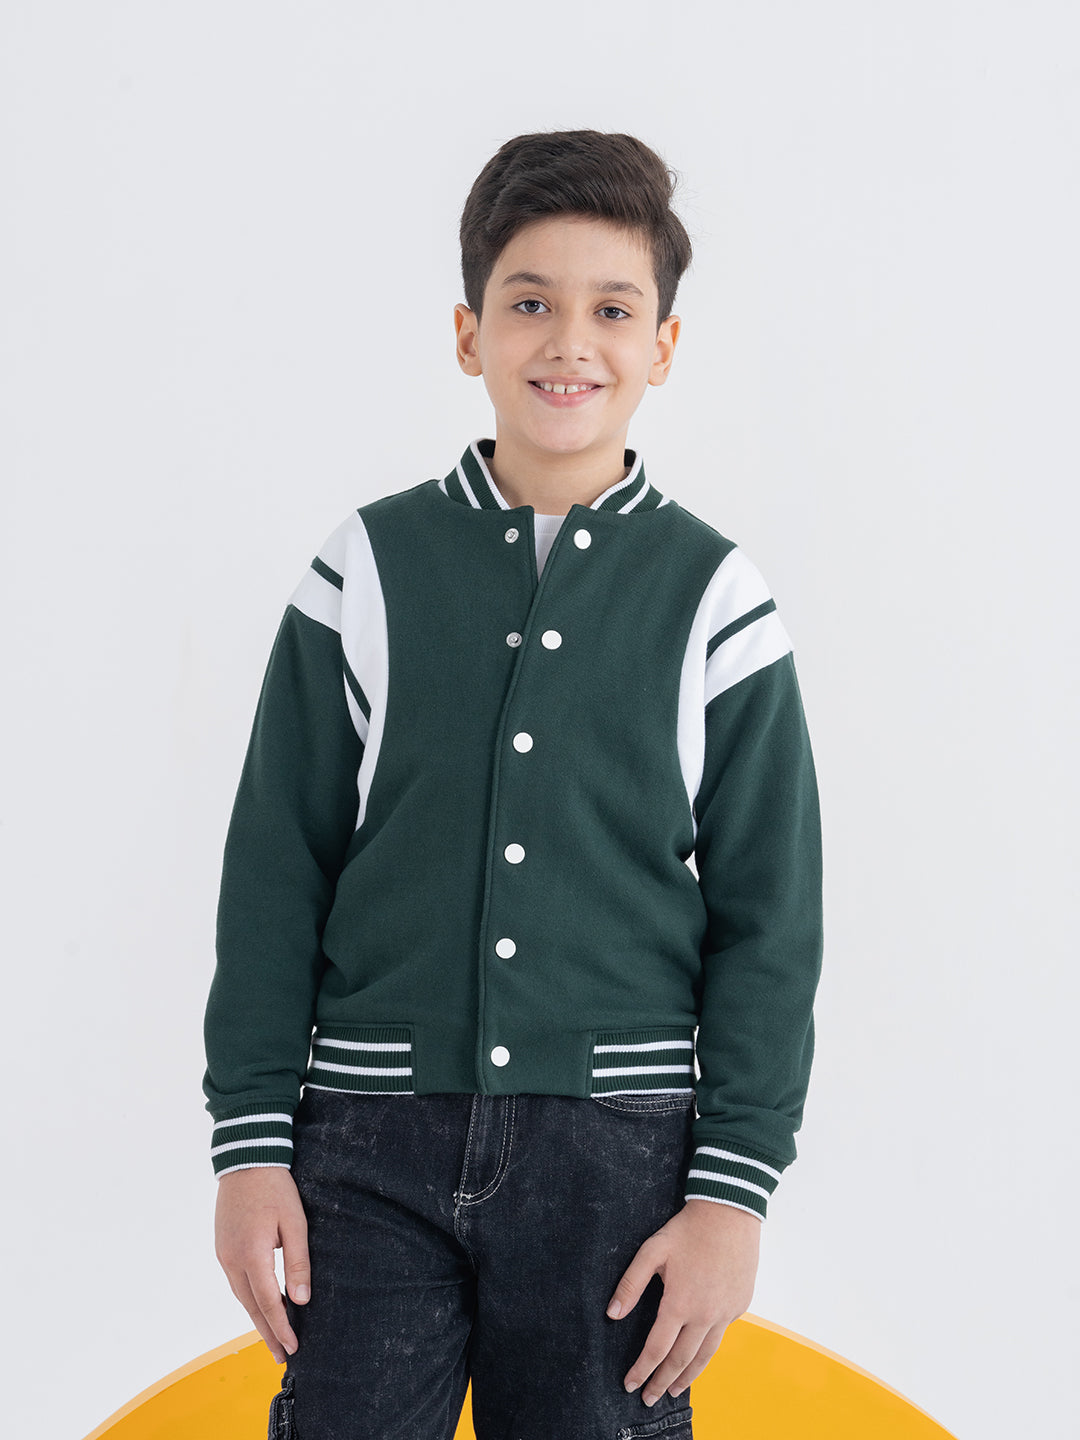 Teal Green And White Color Blocking Unisex Jackets